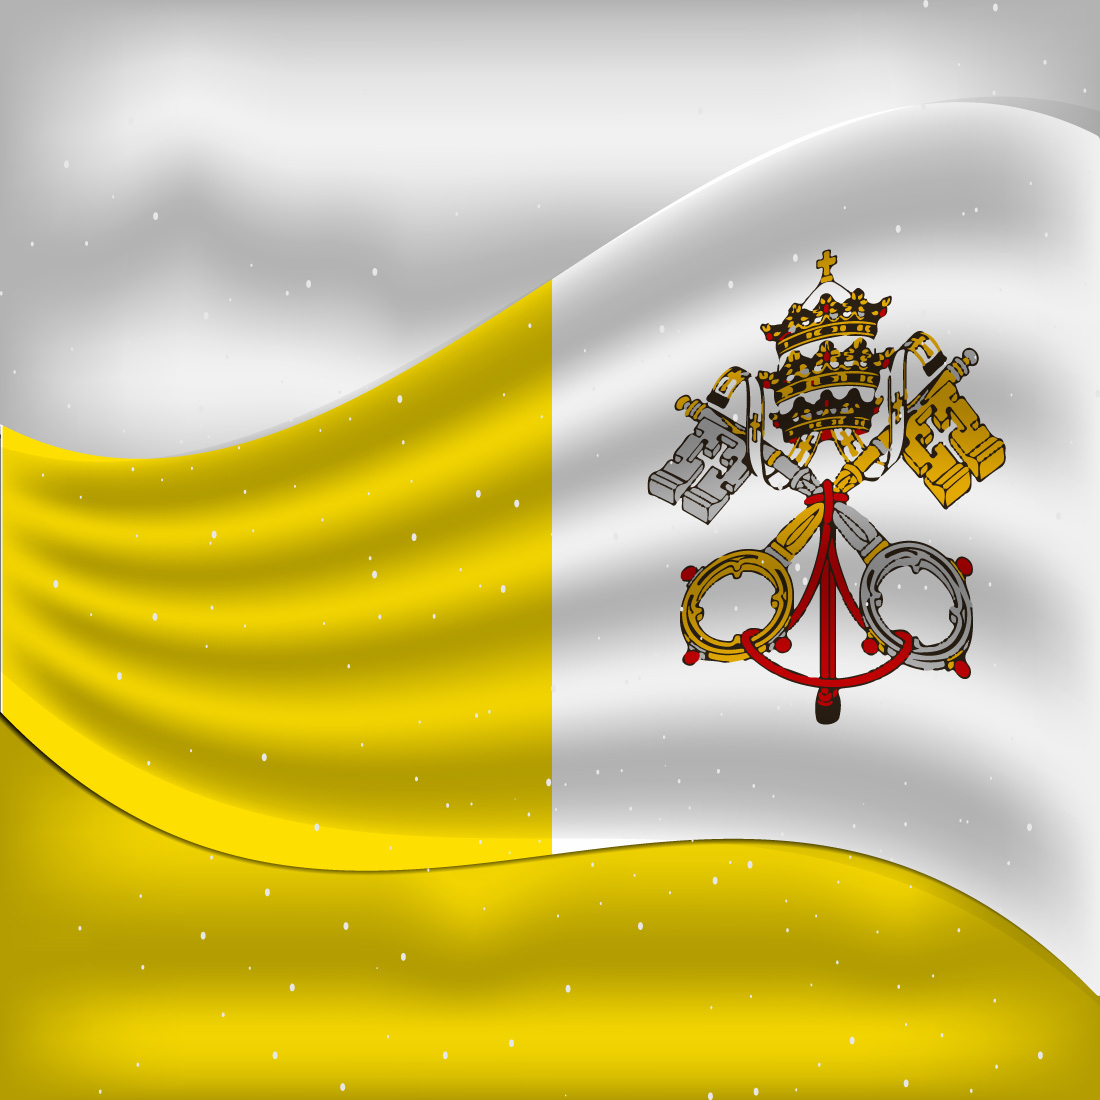 Wonderful image of the flag of the Vatican.